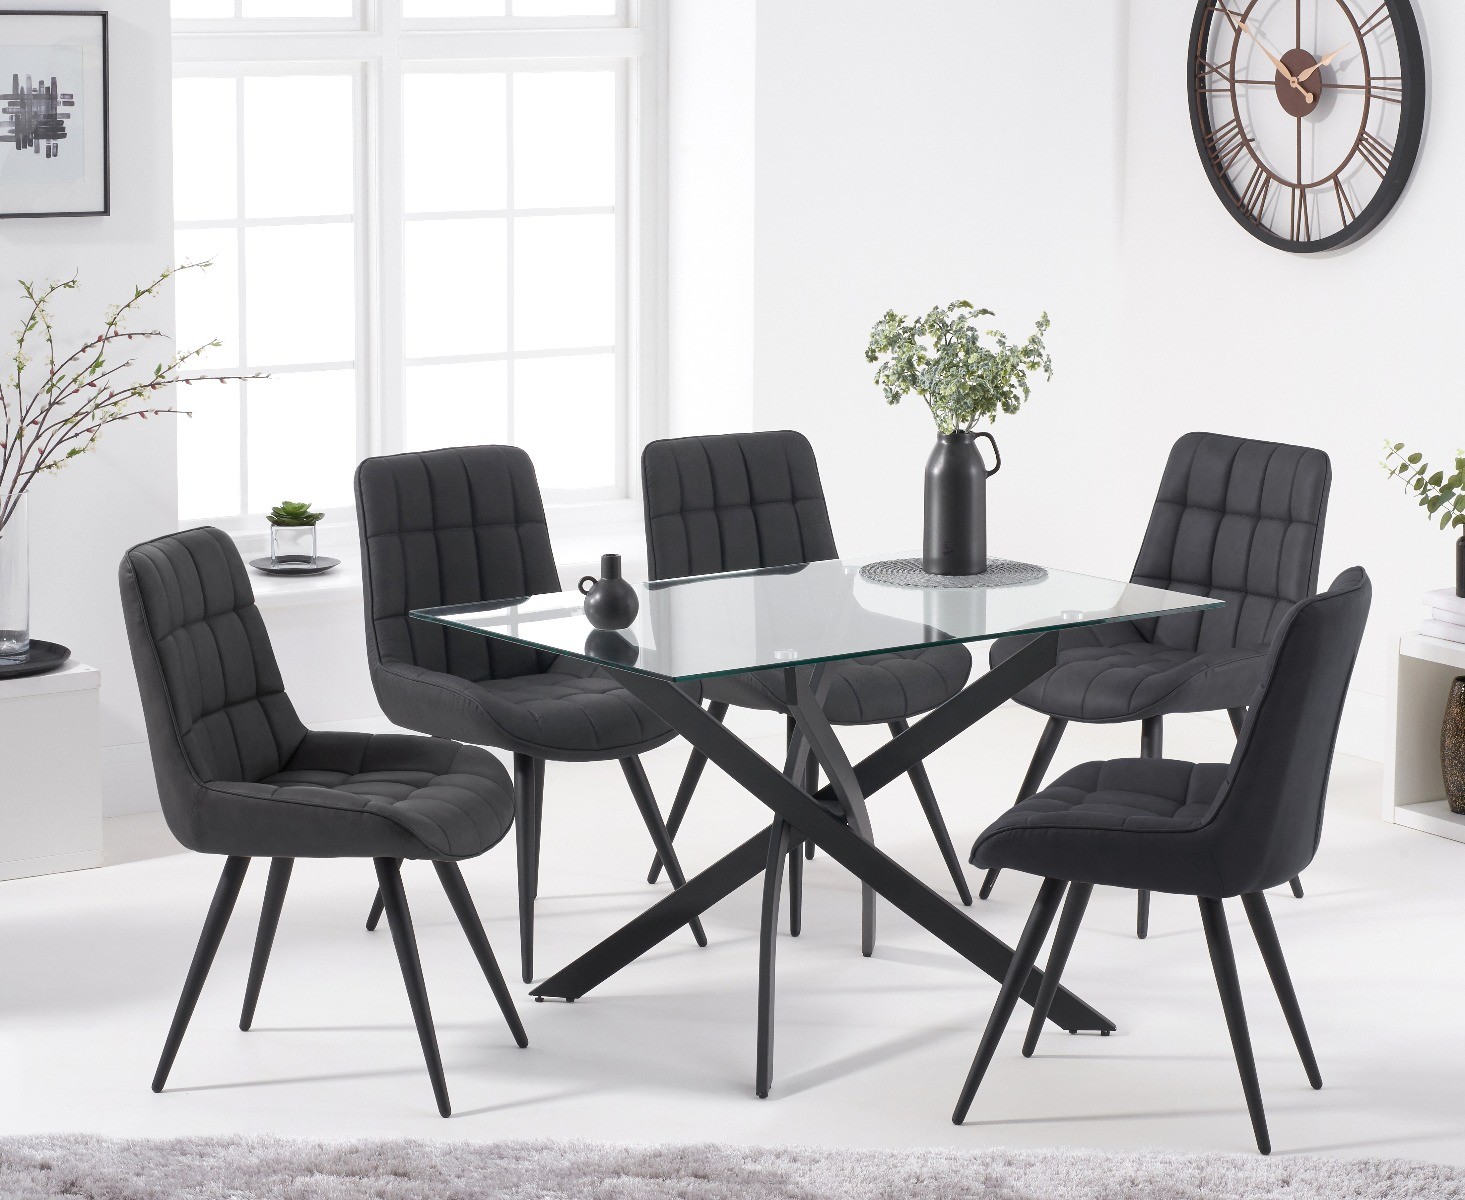 An image of Mara 120cm Rectangular Glass Dining Table with Heidi Chairs - Brown, 4 Chairs